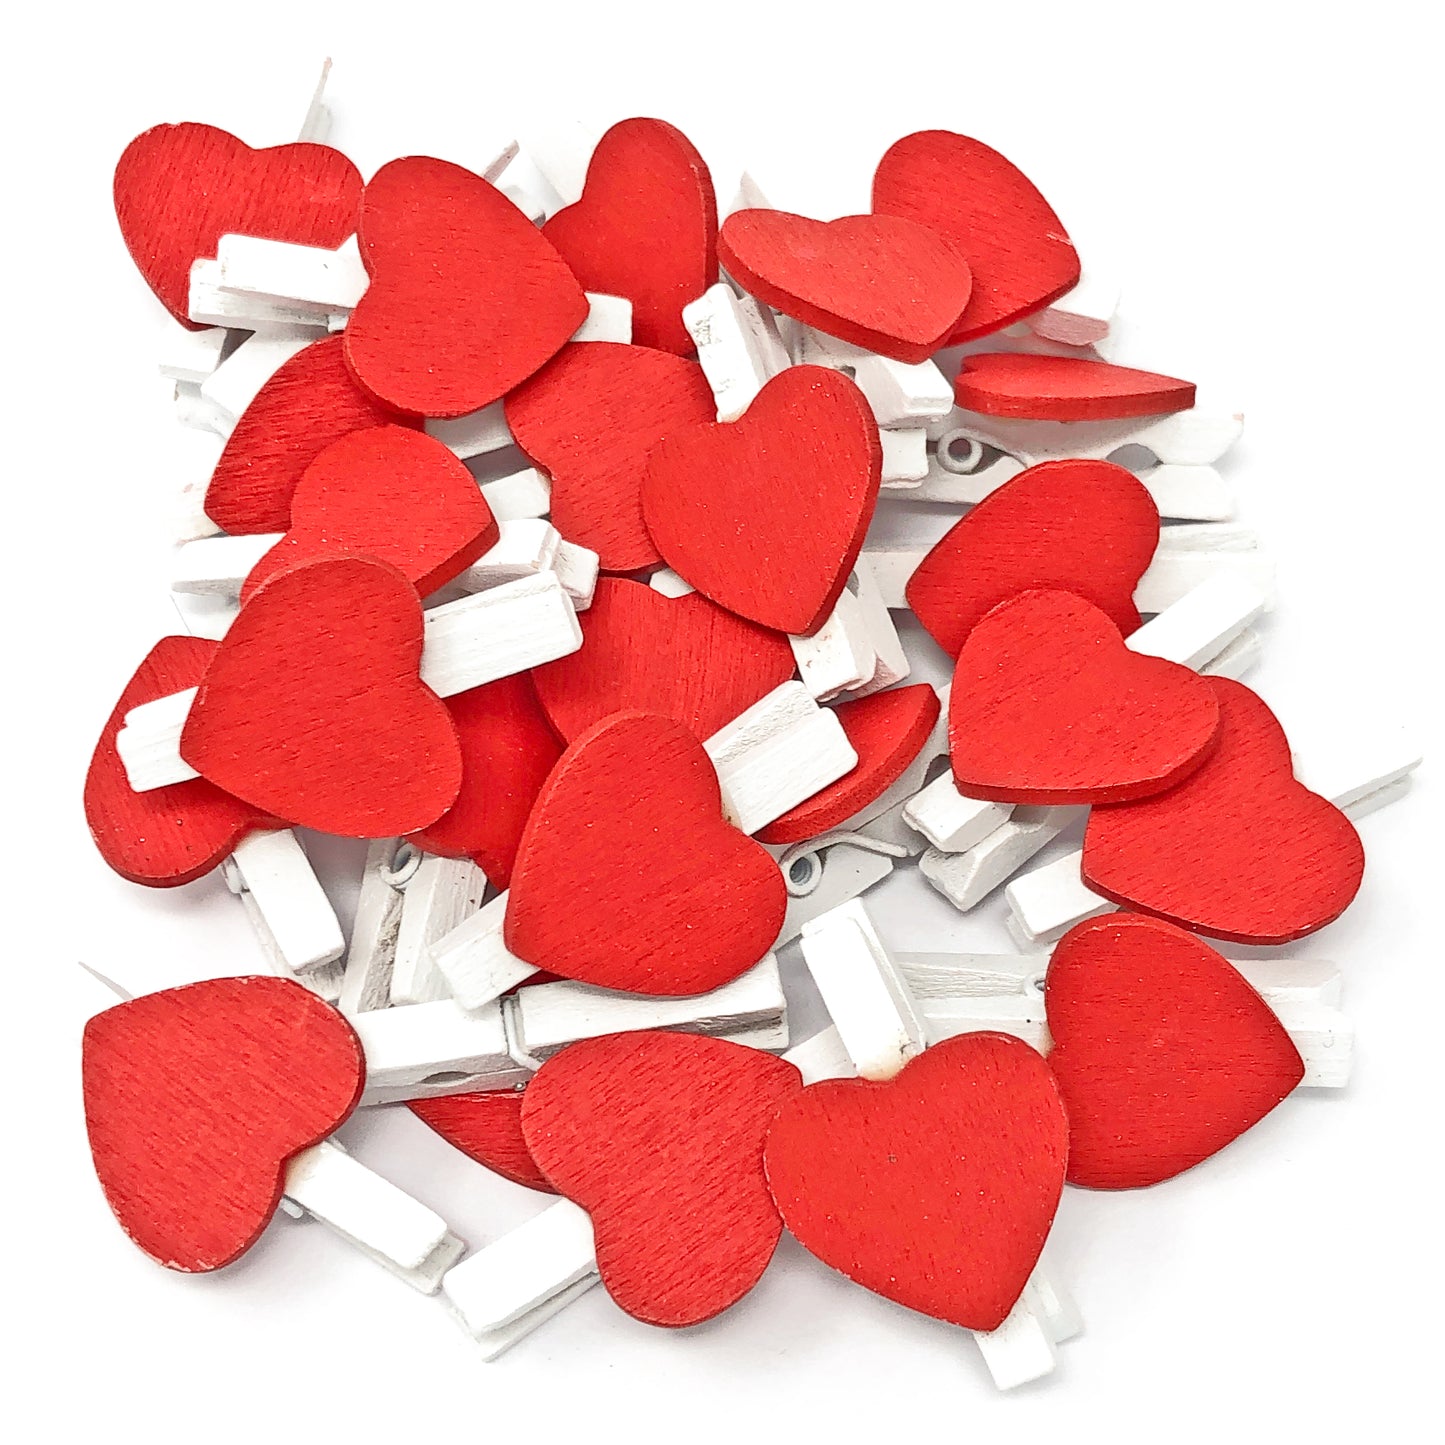 Red 30mm White Pegs with 18mm Coloured Hearts